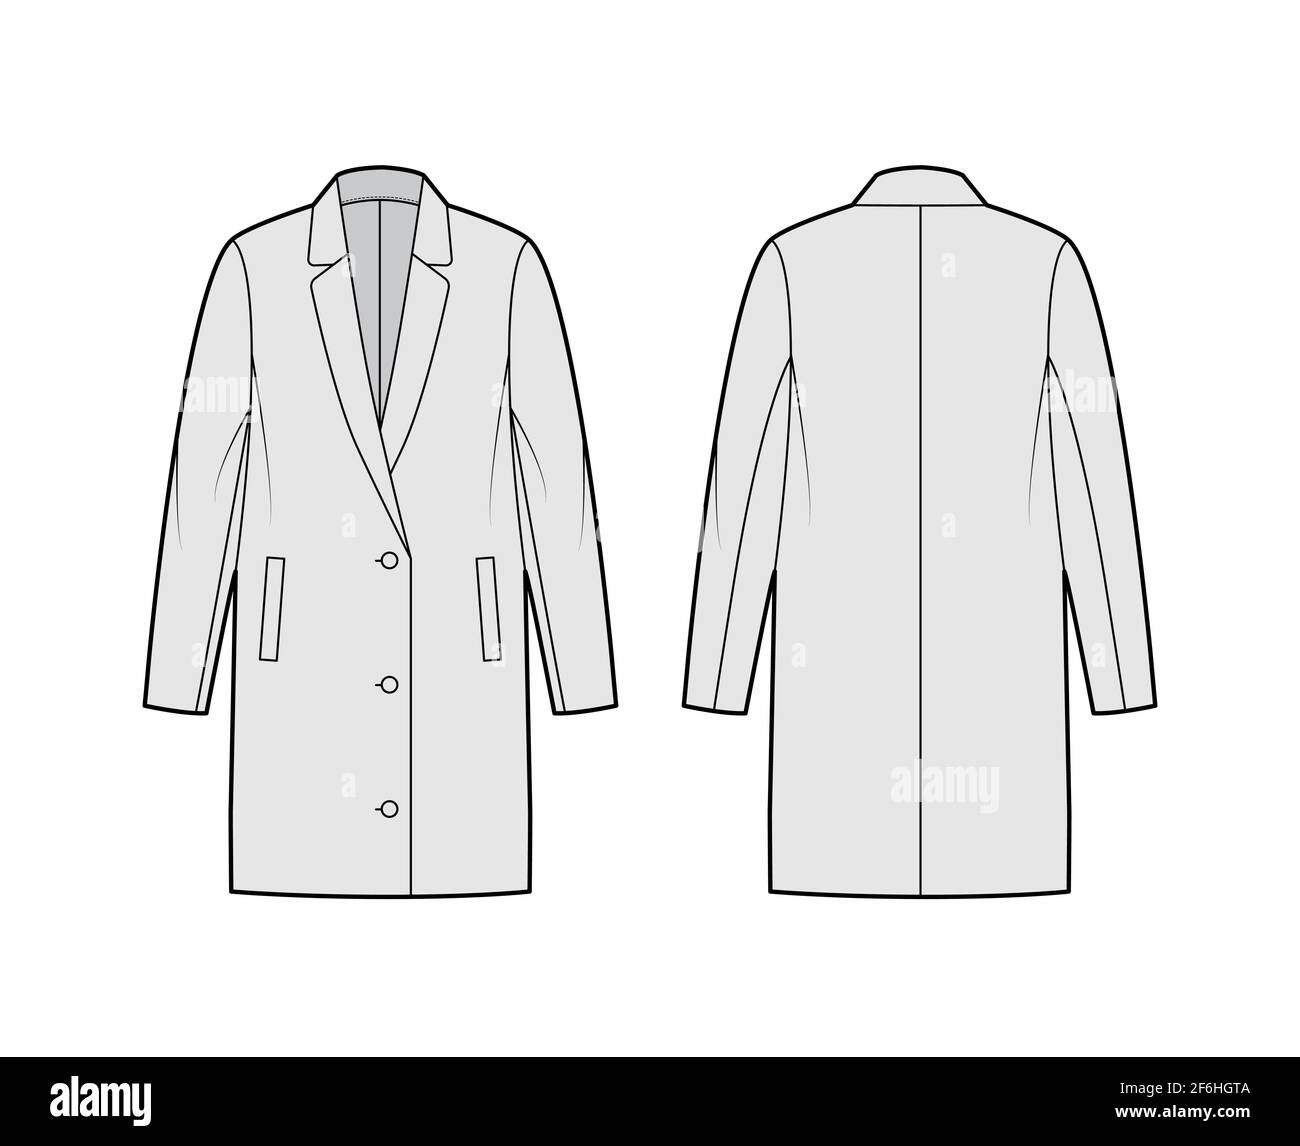 Oversized jacket technical fashion illustration with notched elongated lapel collar, long sleeves, welt pockets. Flat coat template front, back, grey color style. Women, men, unisex top CAD mockup Stock Vector